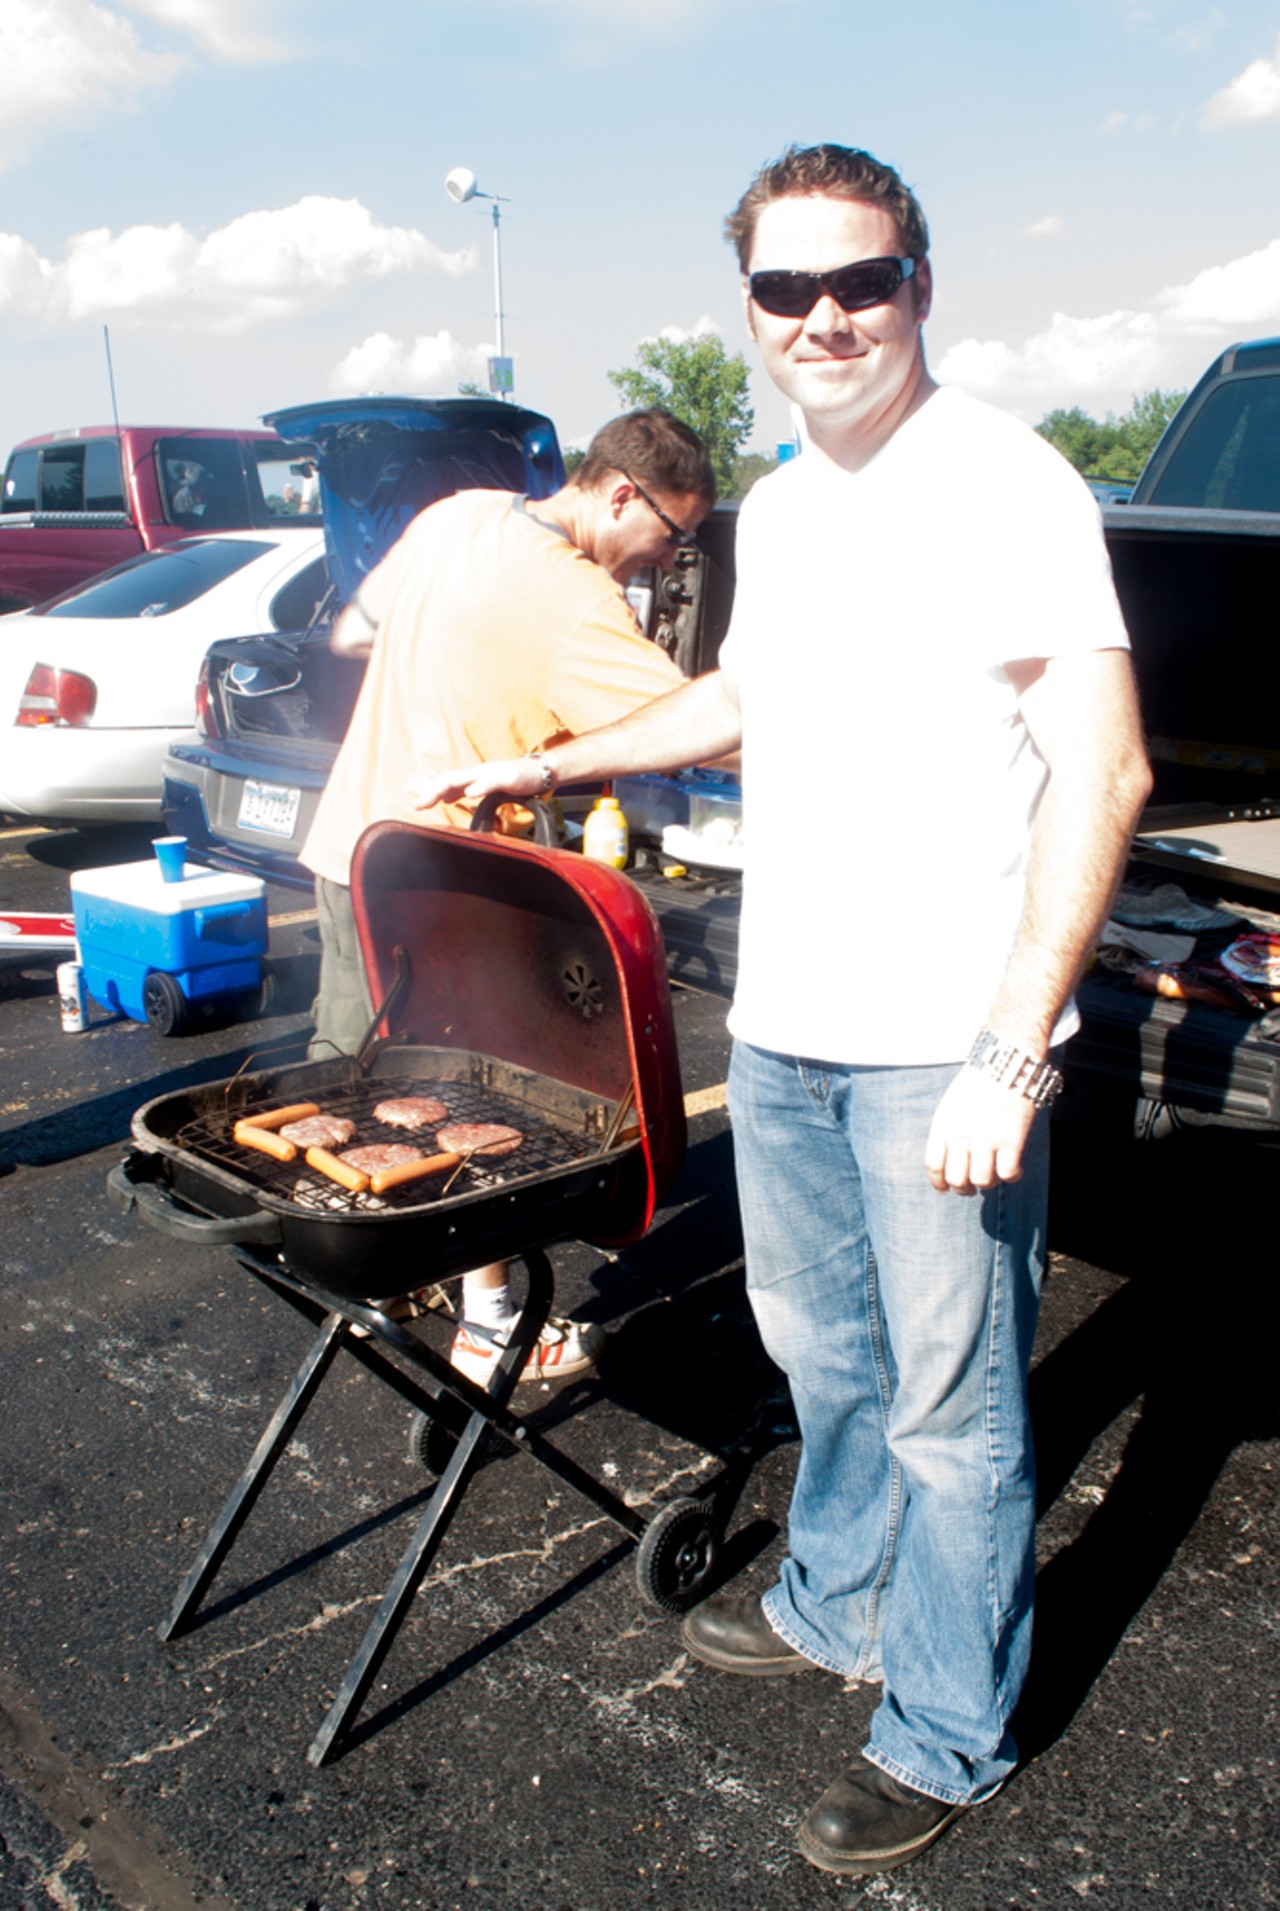 Rich Tideswell prepares a burger while Rob Grieser proudly shows off his grill.